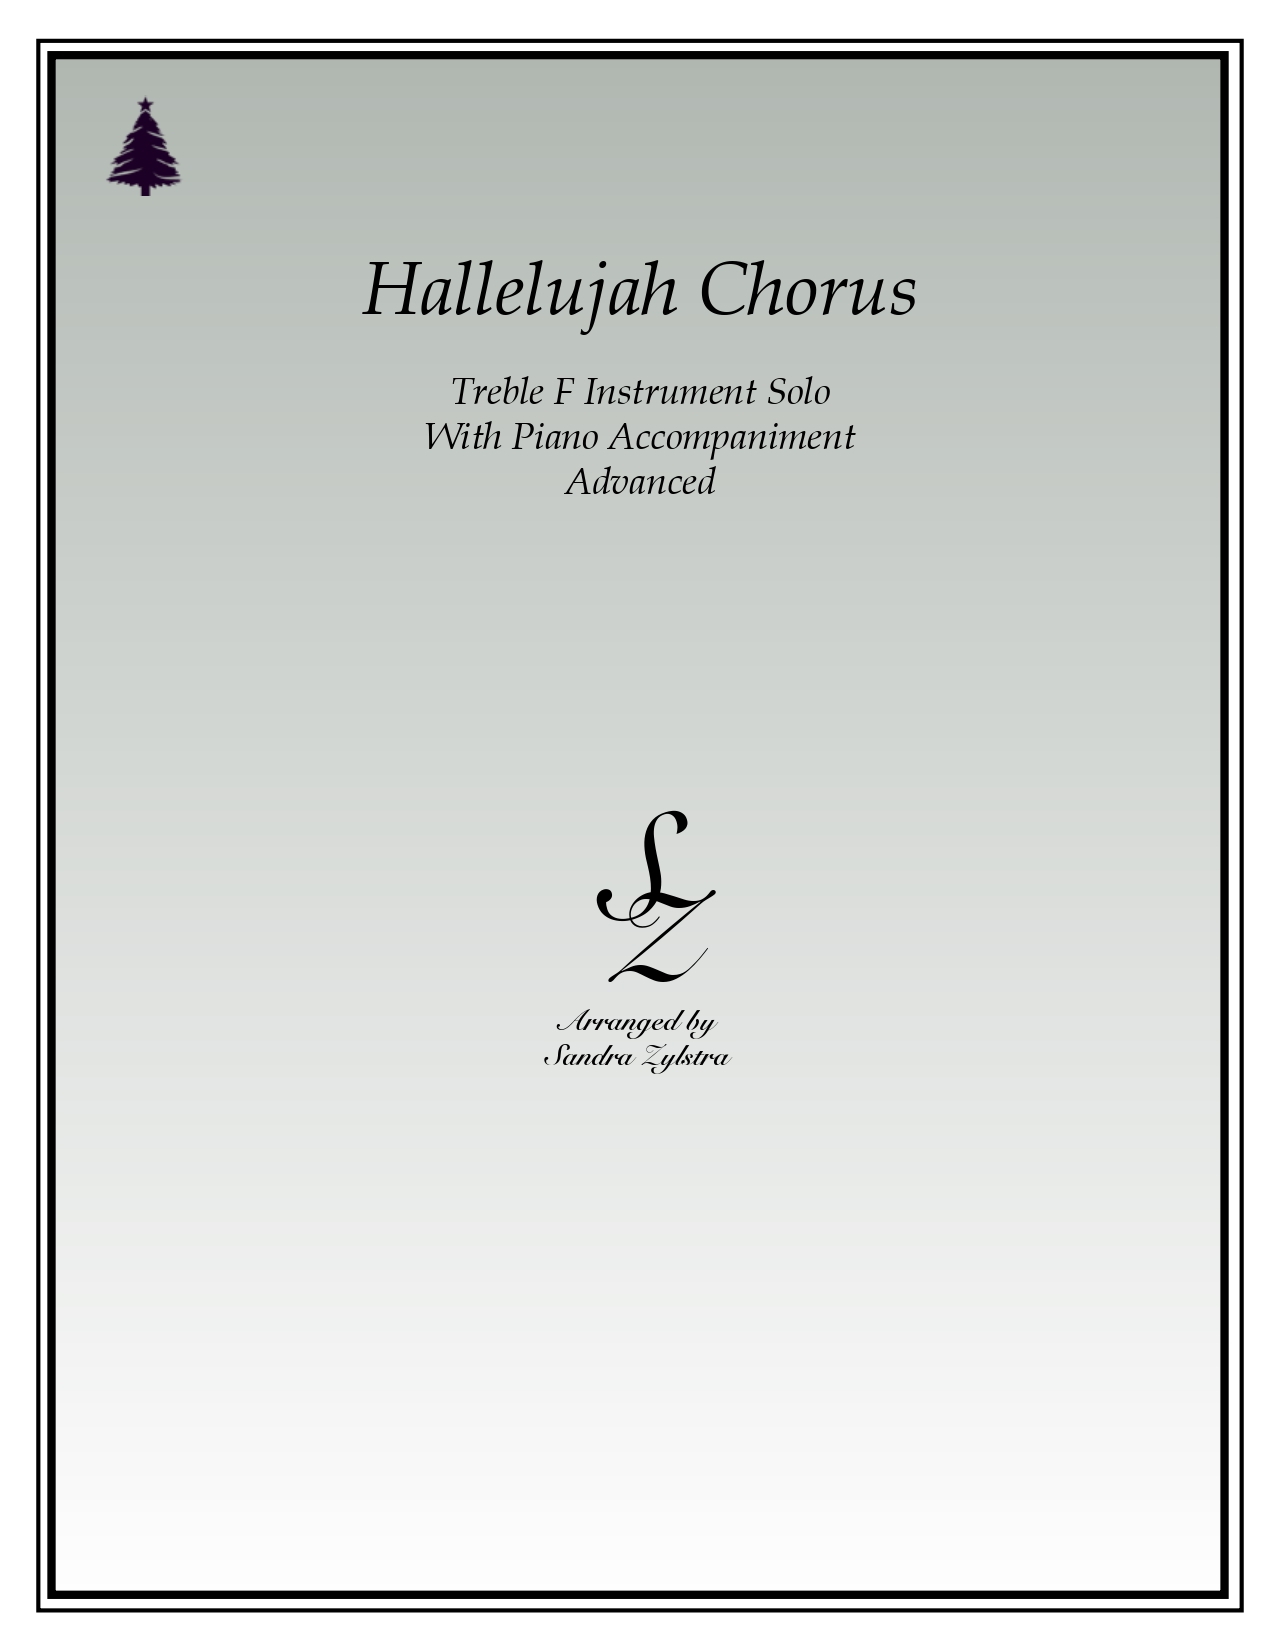 Hallelujah Chorus F instrument solo part cover page 00011